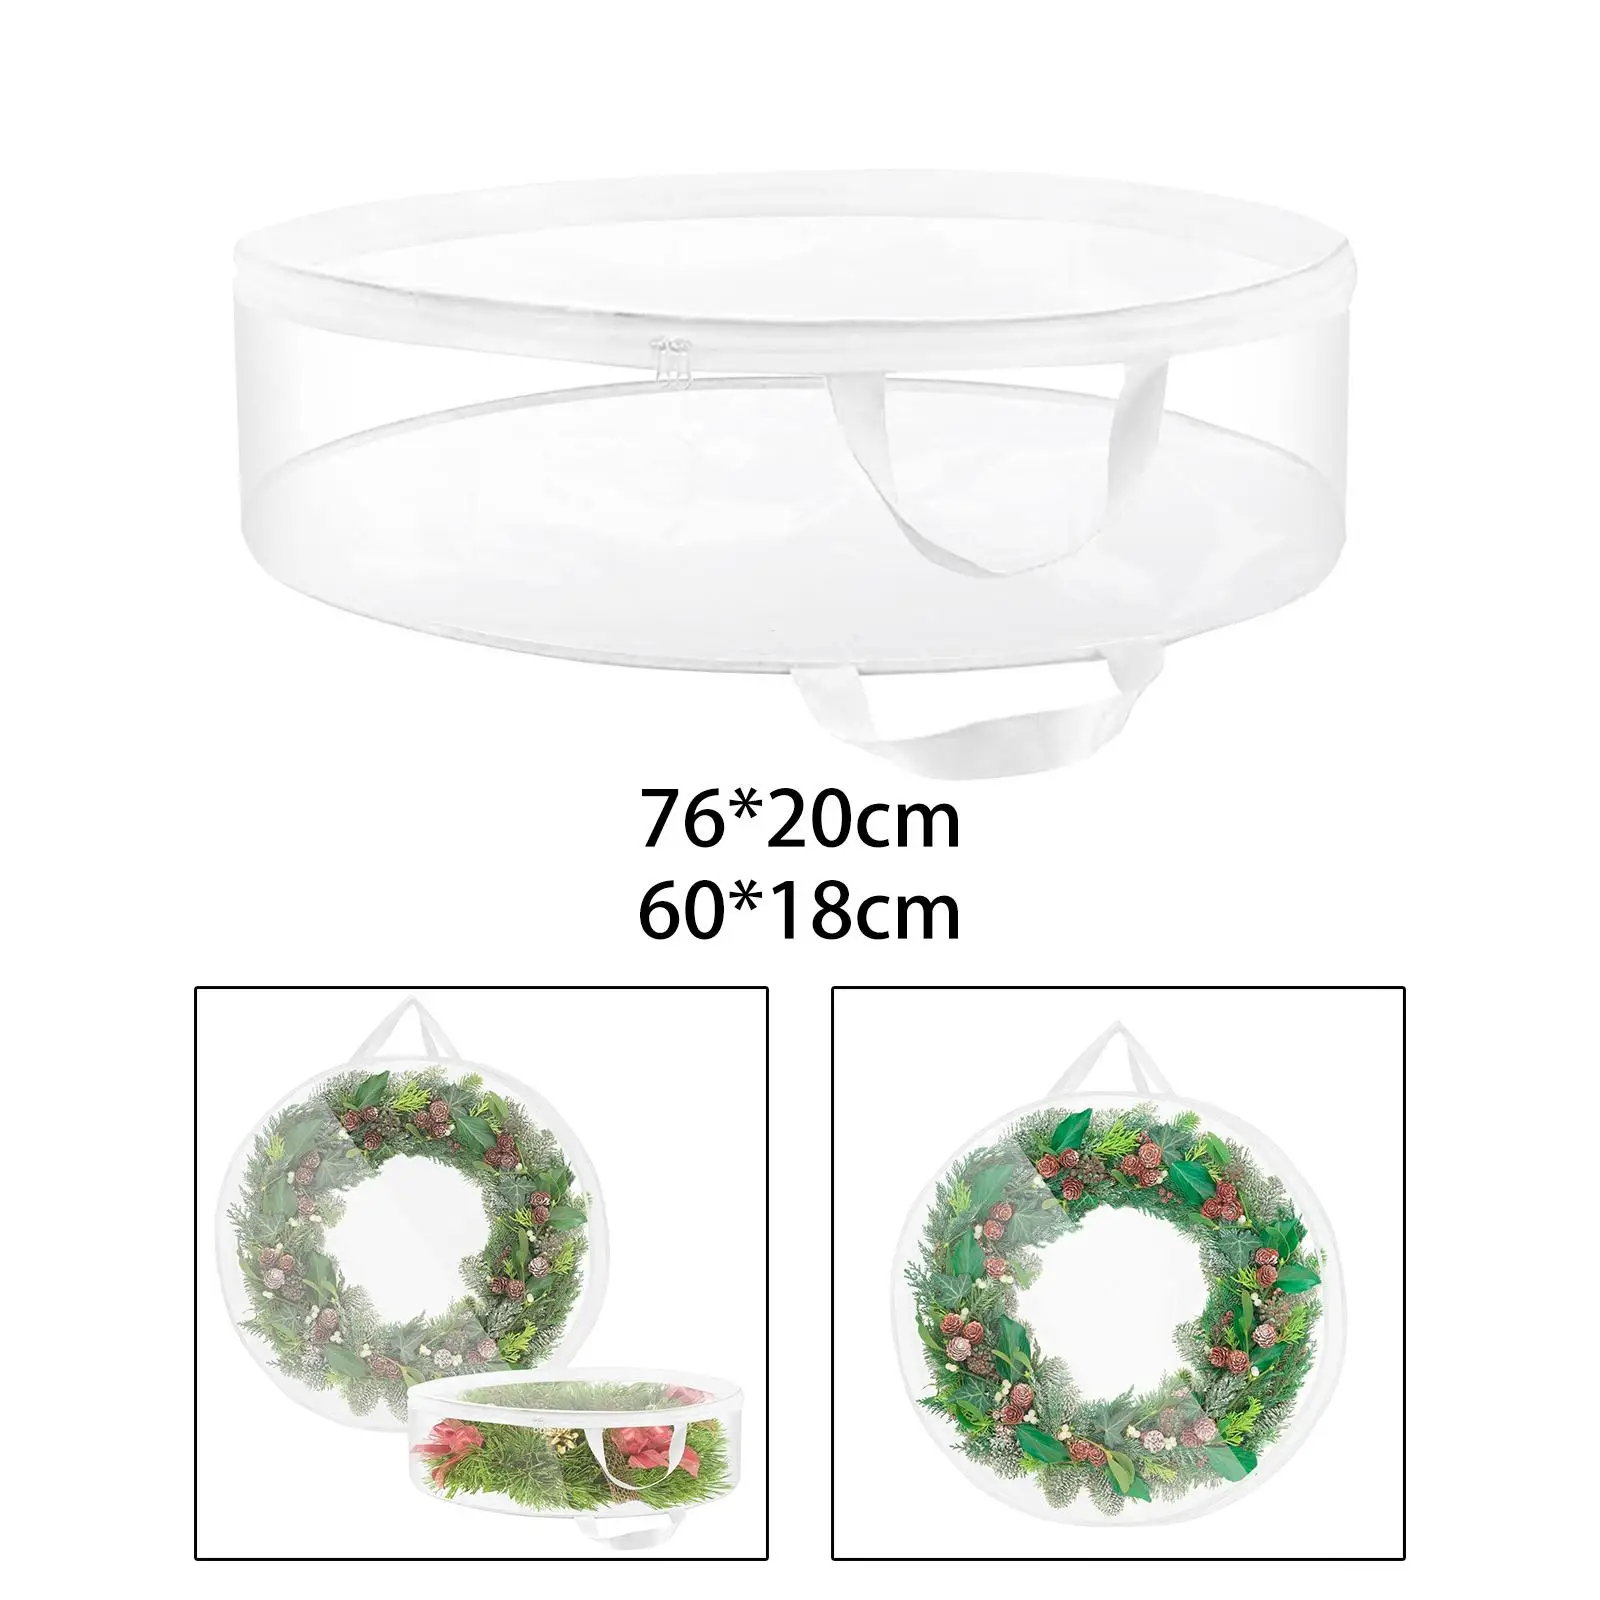 Wreath Storage Bags Round Reusable Portable Dual Zipper Christmas Wreath Storage Container for Xmas Seasonal Holiday Garland